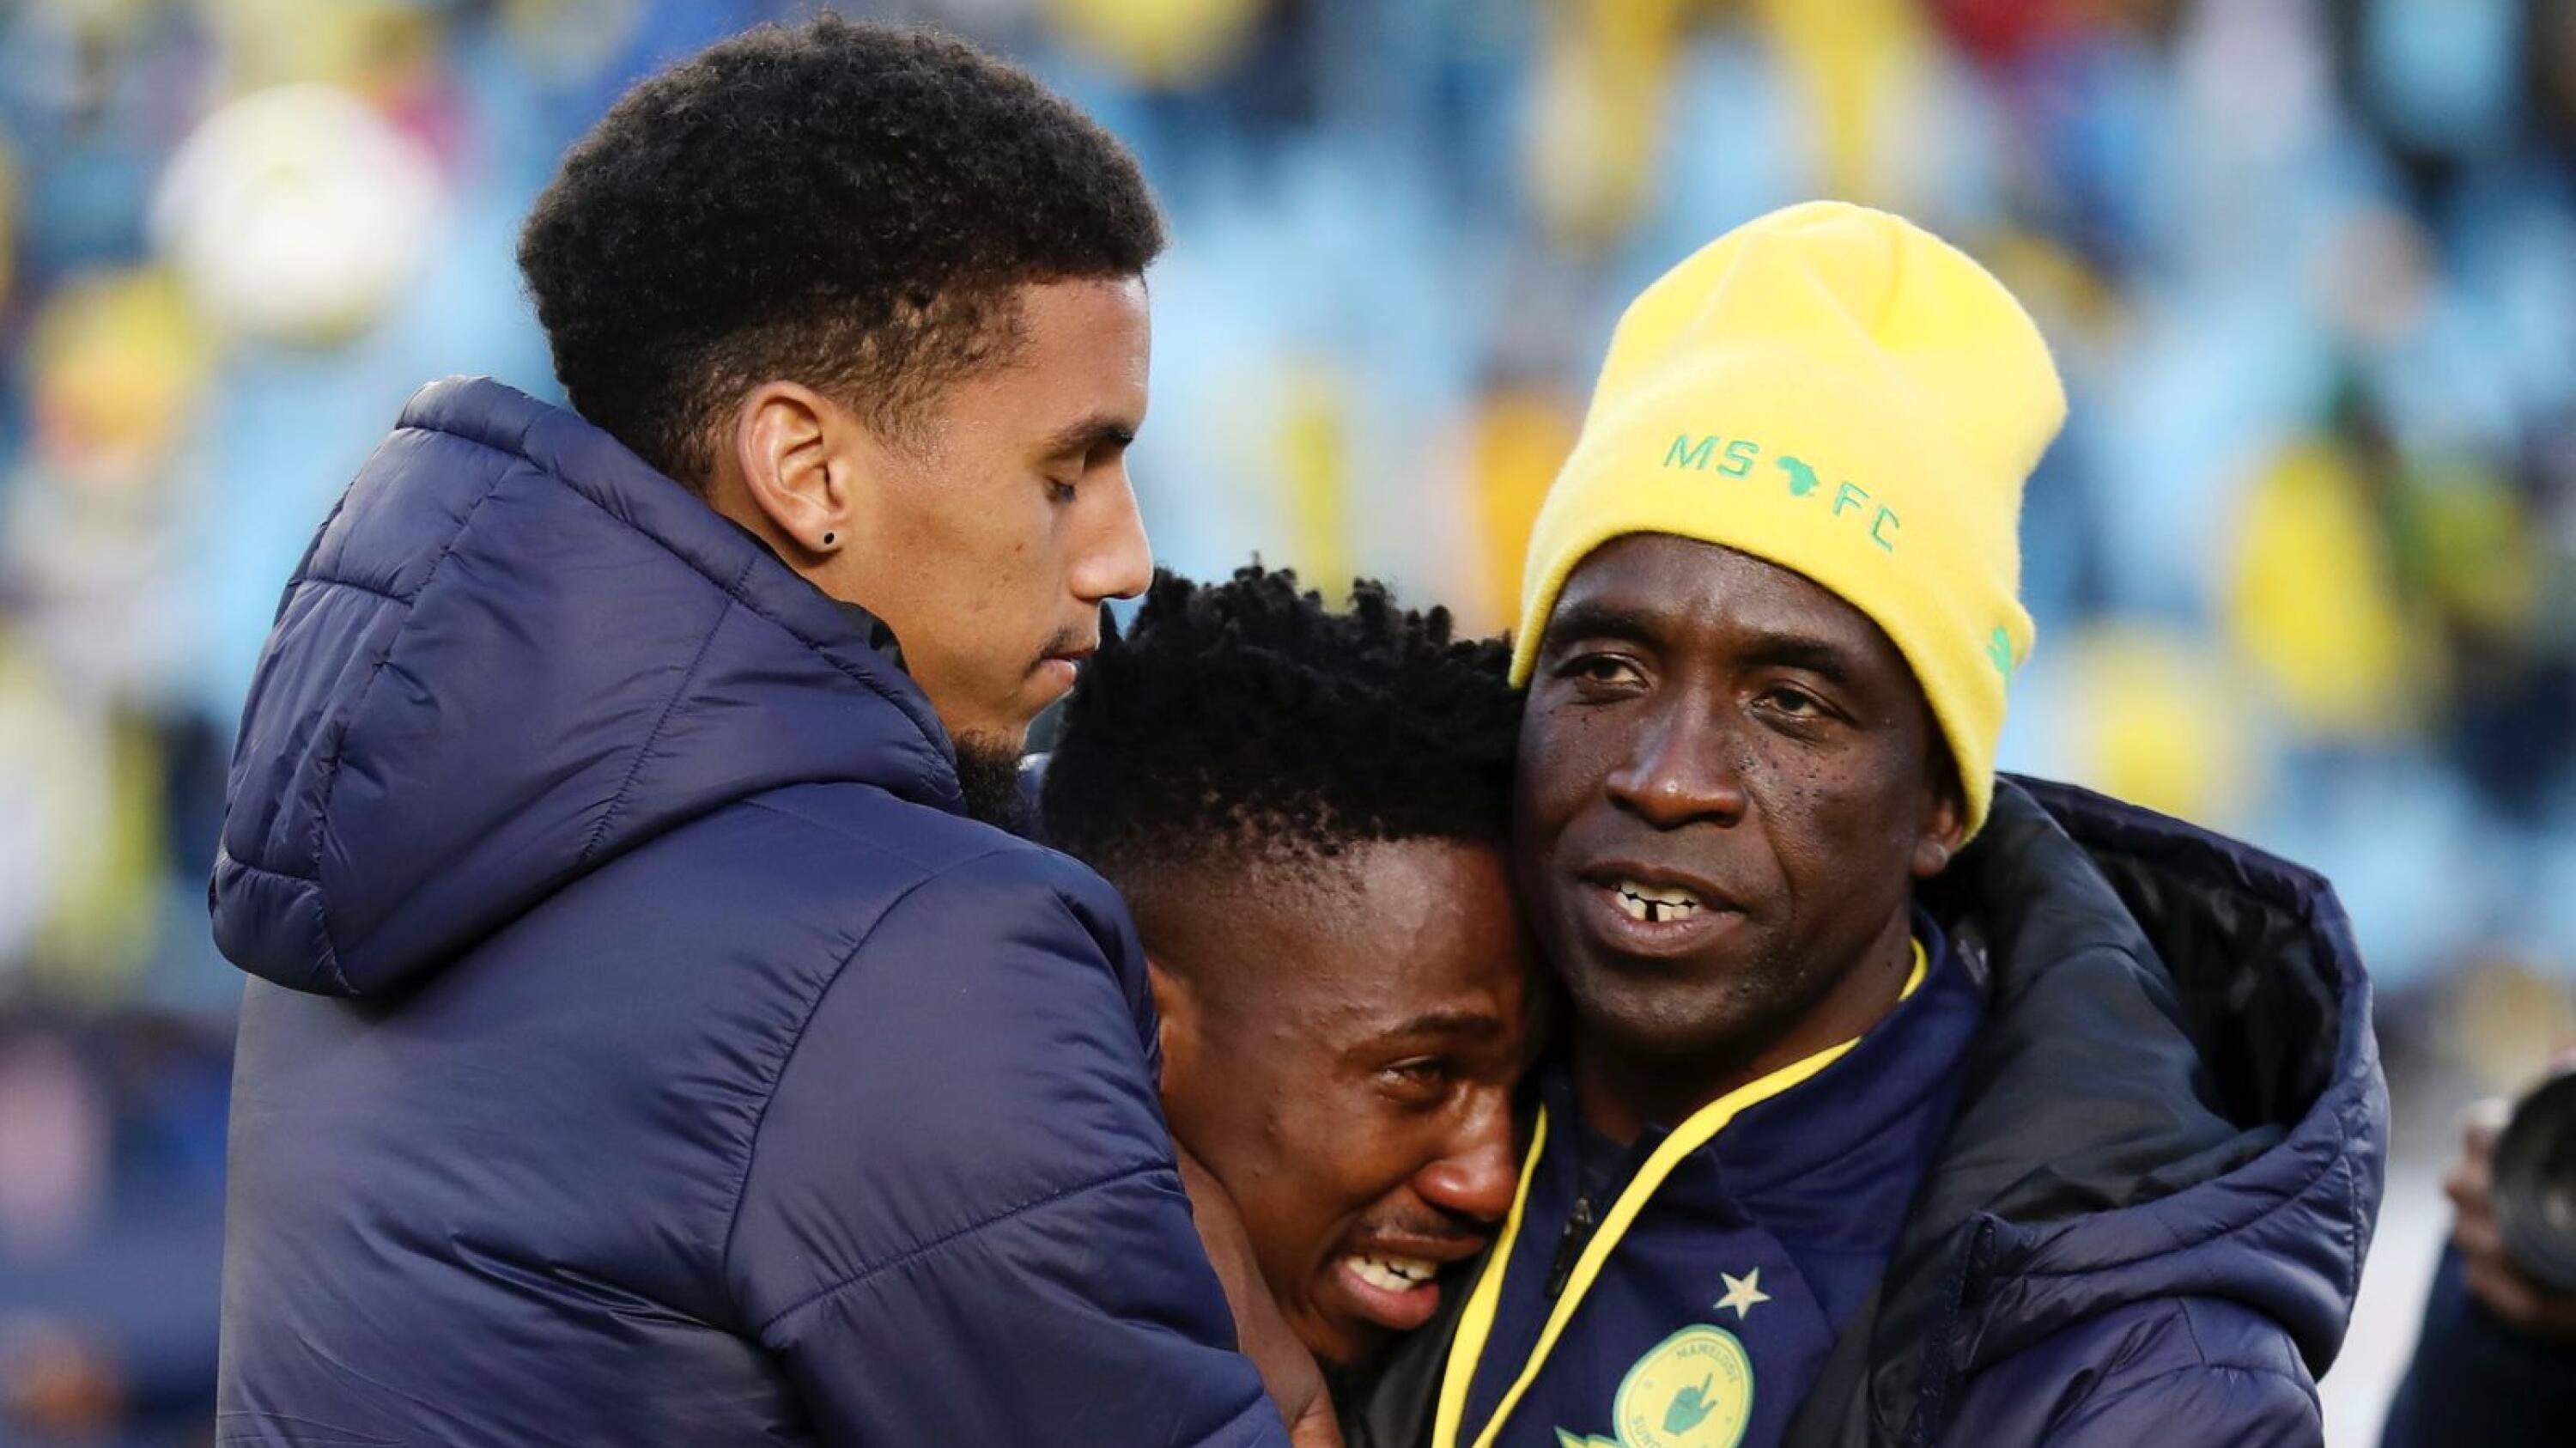 Cassius Mailula of Mamelodi Sundowns intears after lossing the match during the CAF Champions League 2022/23 Semifinal match between Mamelodi Sundowns and Wydad at the Loftus Stadium, Pretoria